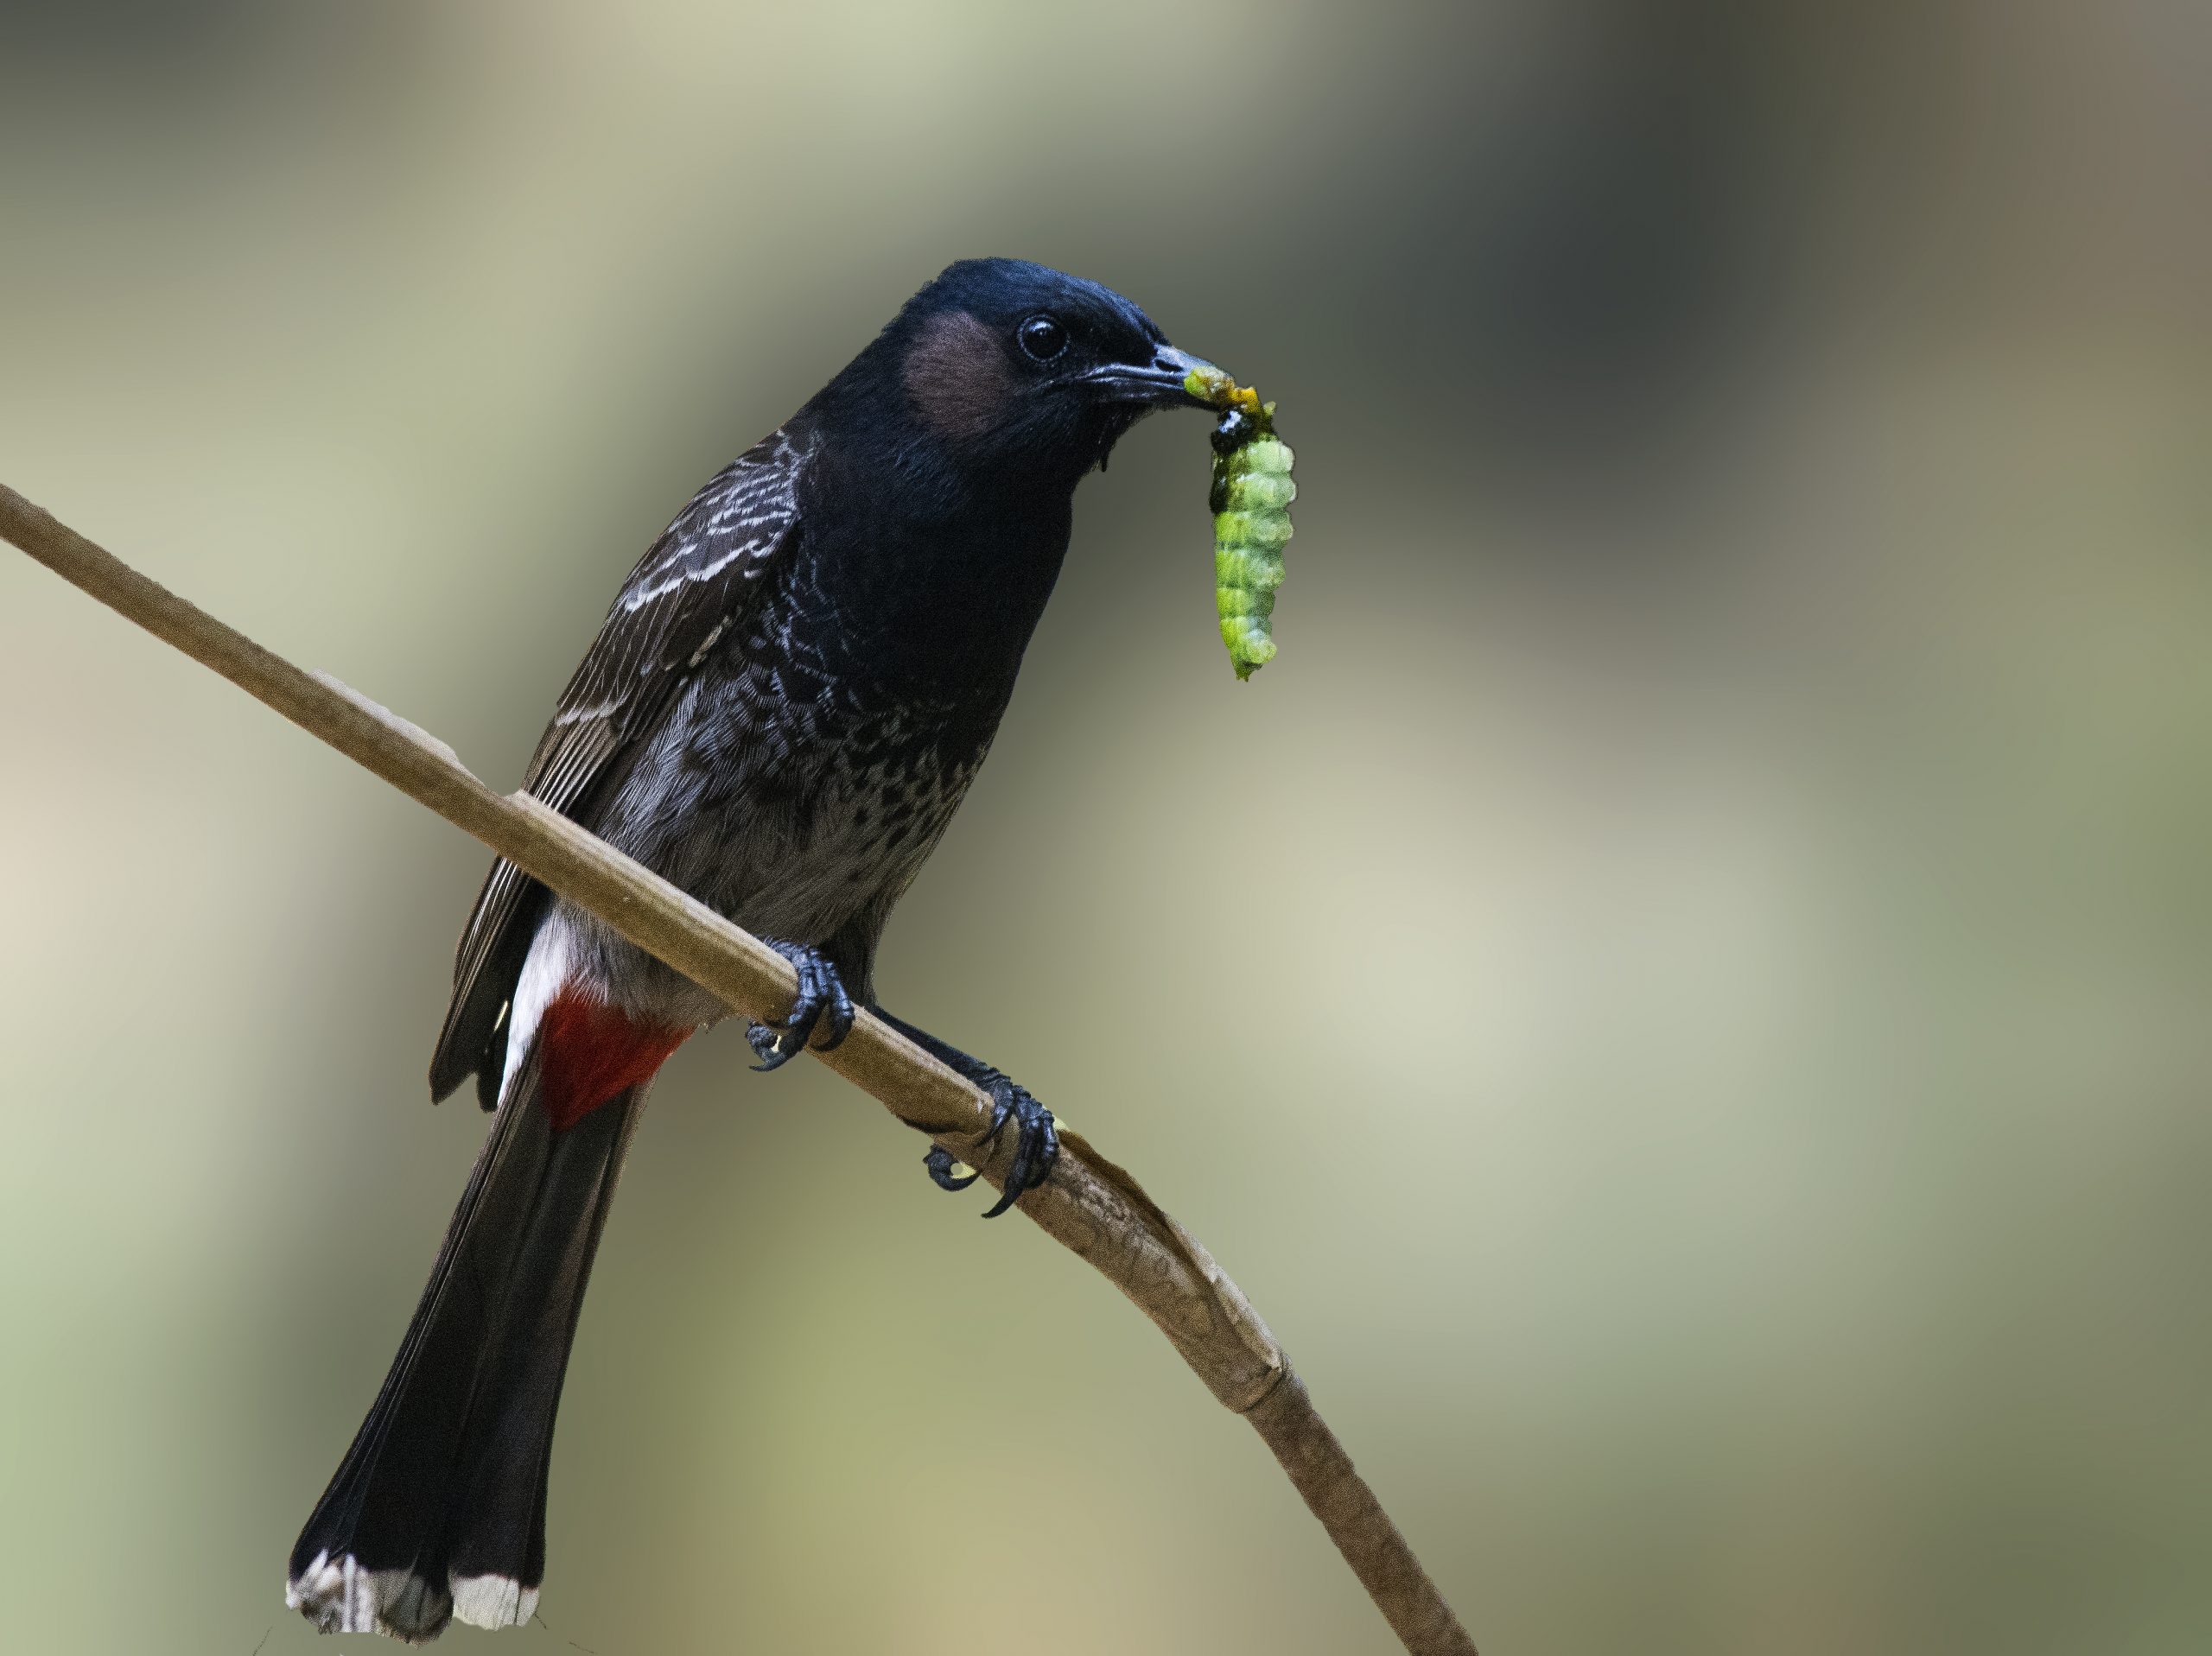 Red-vented Bulbul eating a worm